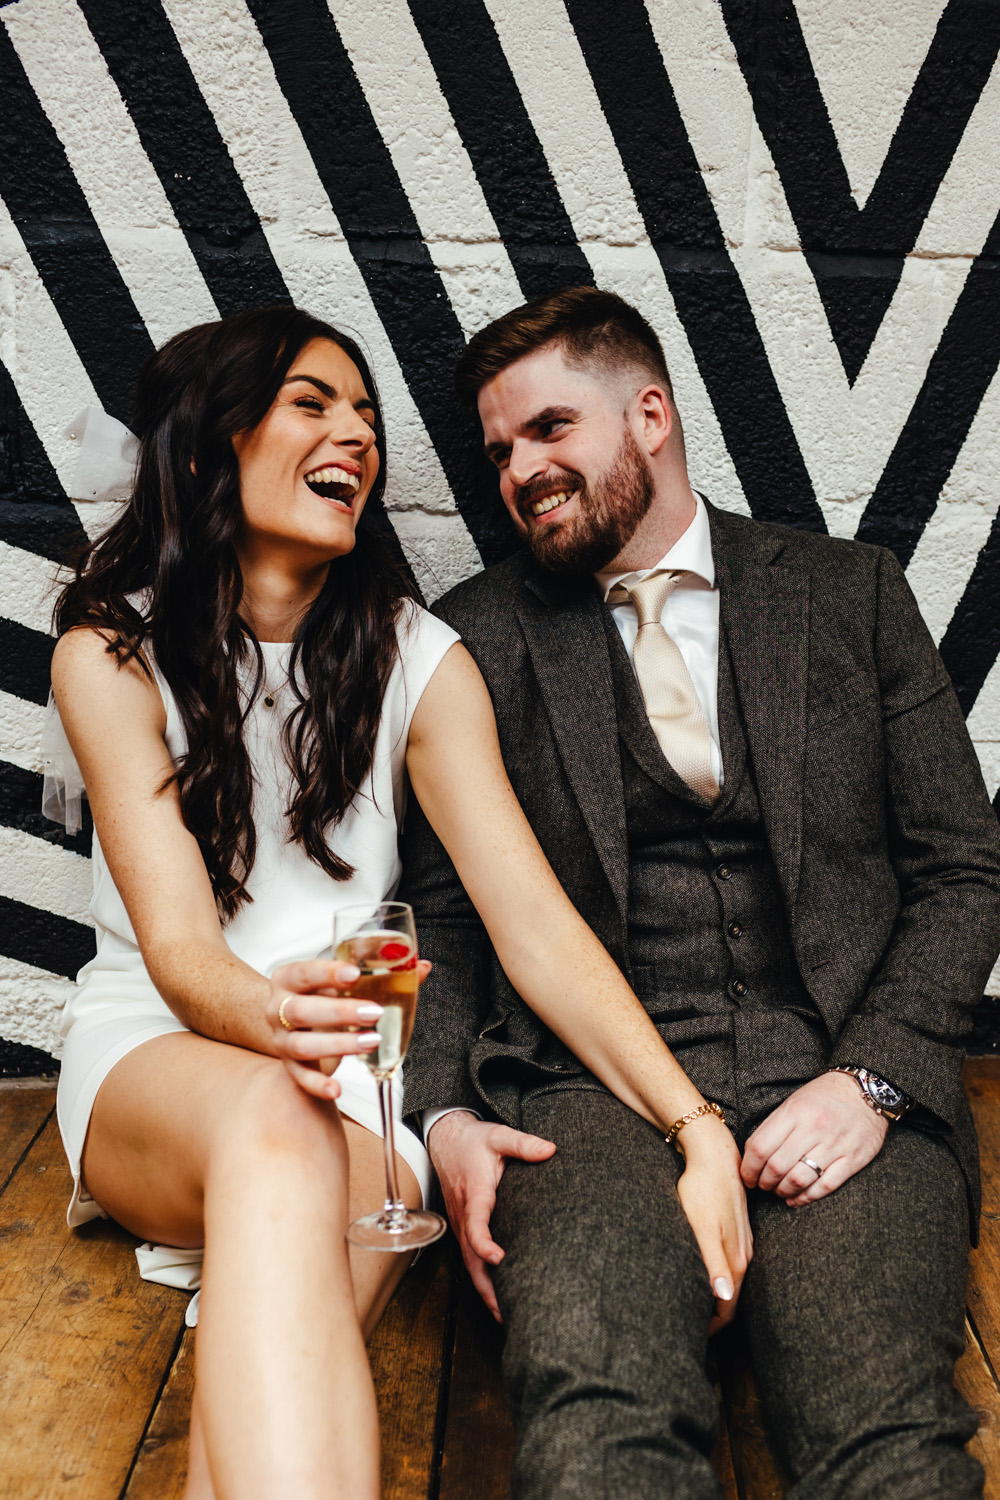 Bride & Groom sitting on the floor in front of a monochrome, geometric patterned wall. They are laughing and look relaxed